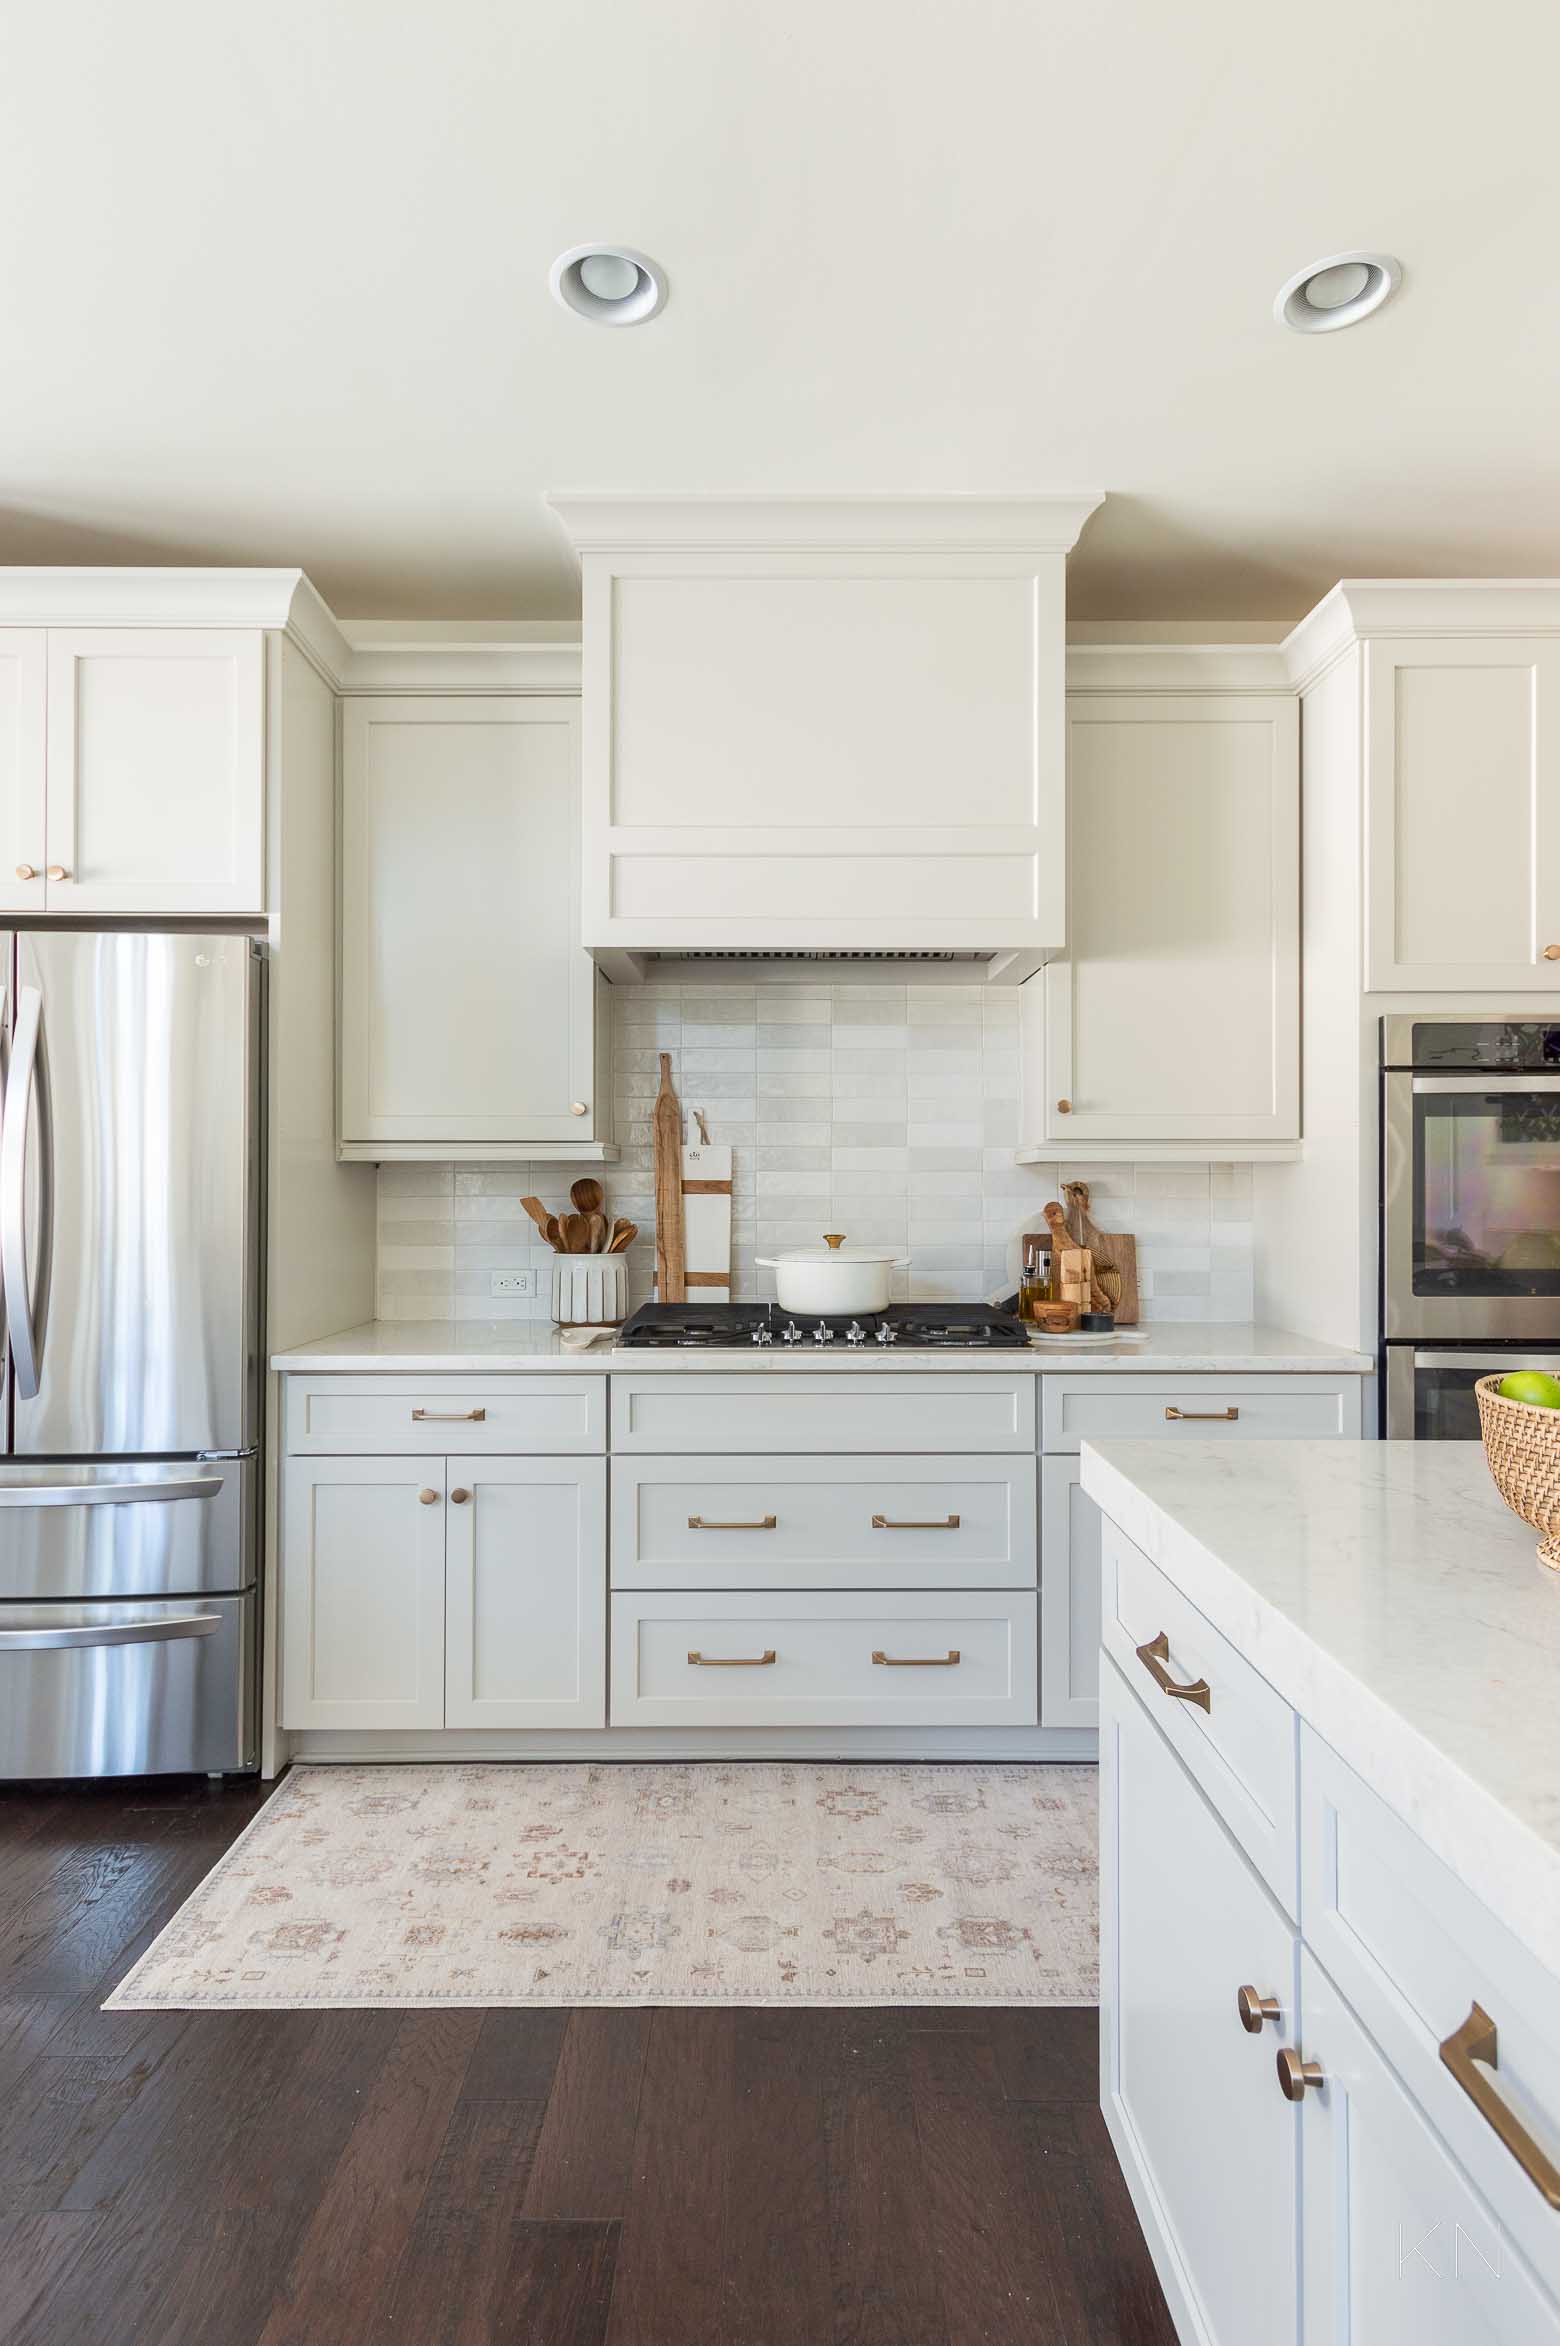 Agreeable Gray Kitchen Cabinets - Kitchen Makeover- Kelley Nan